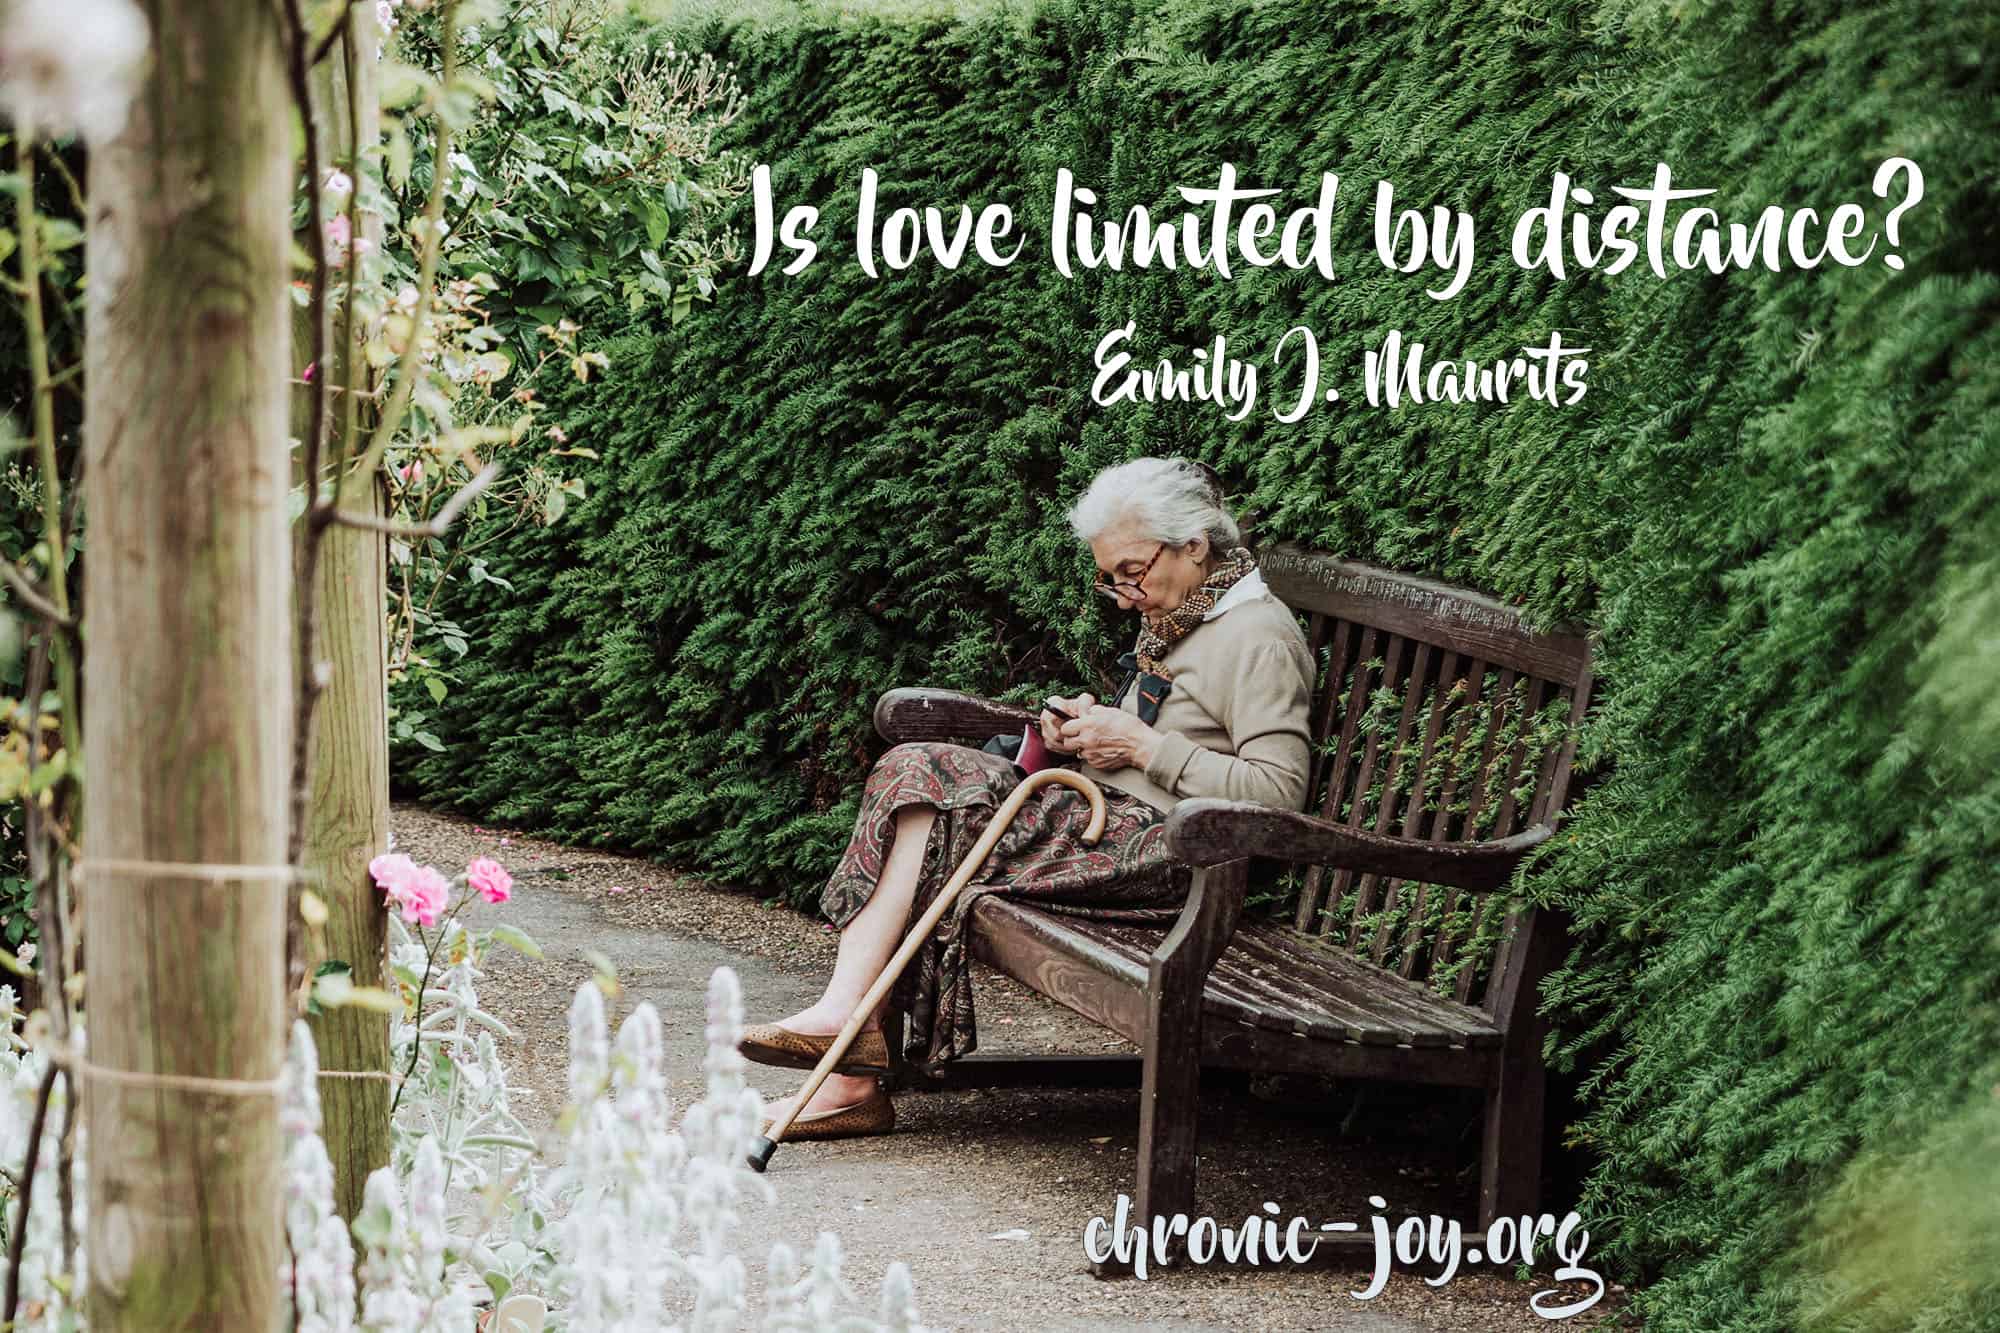 "Is love limited by distance?" Emily J. Maurits